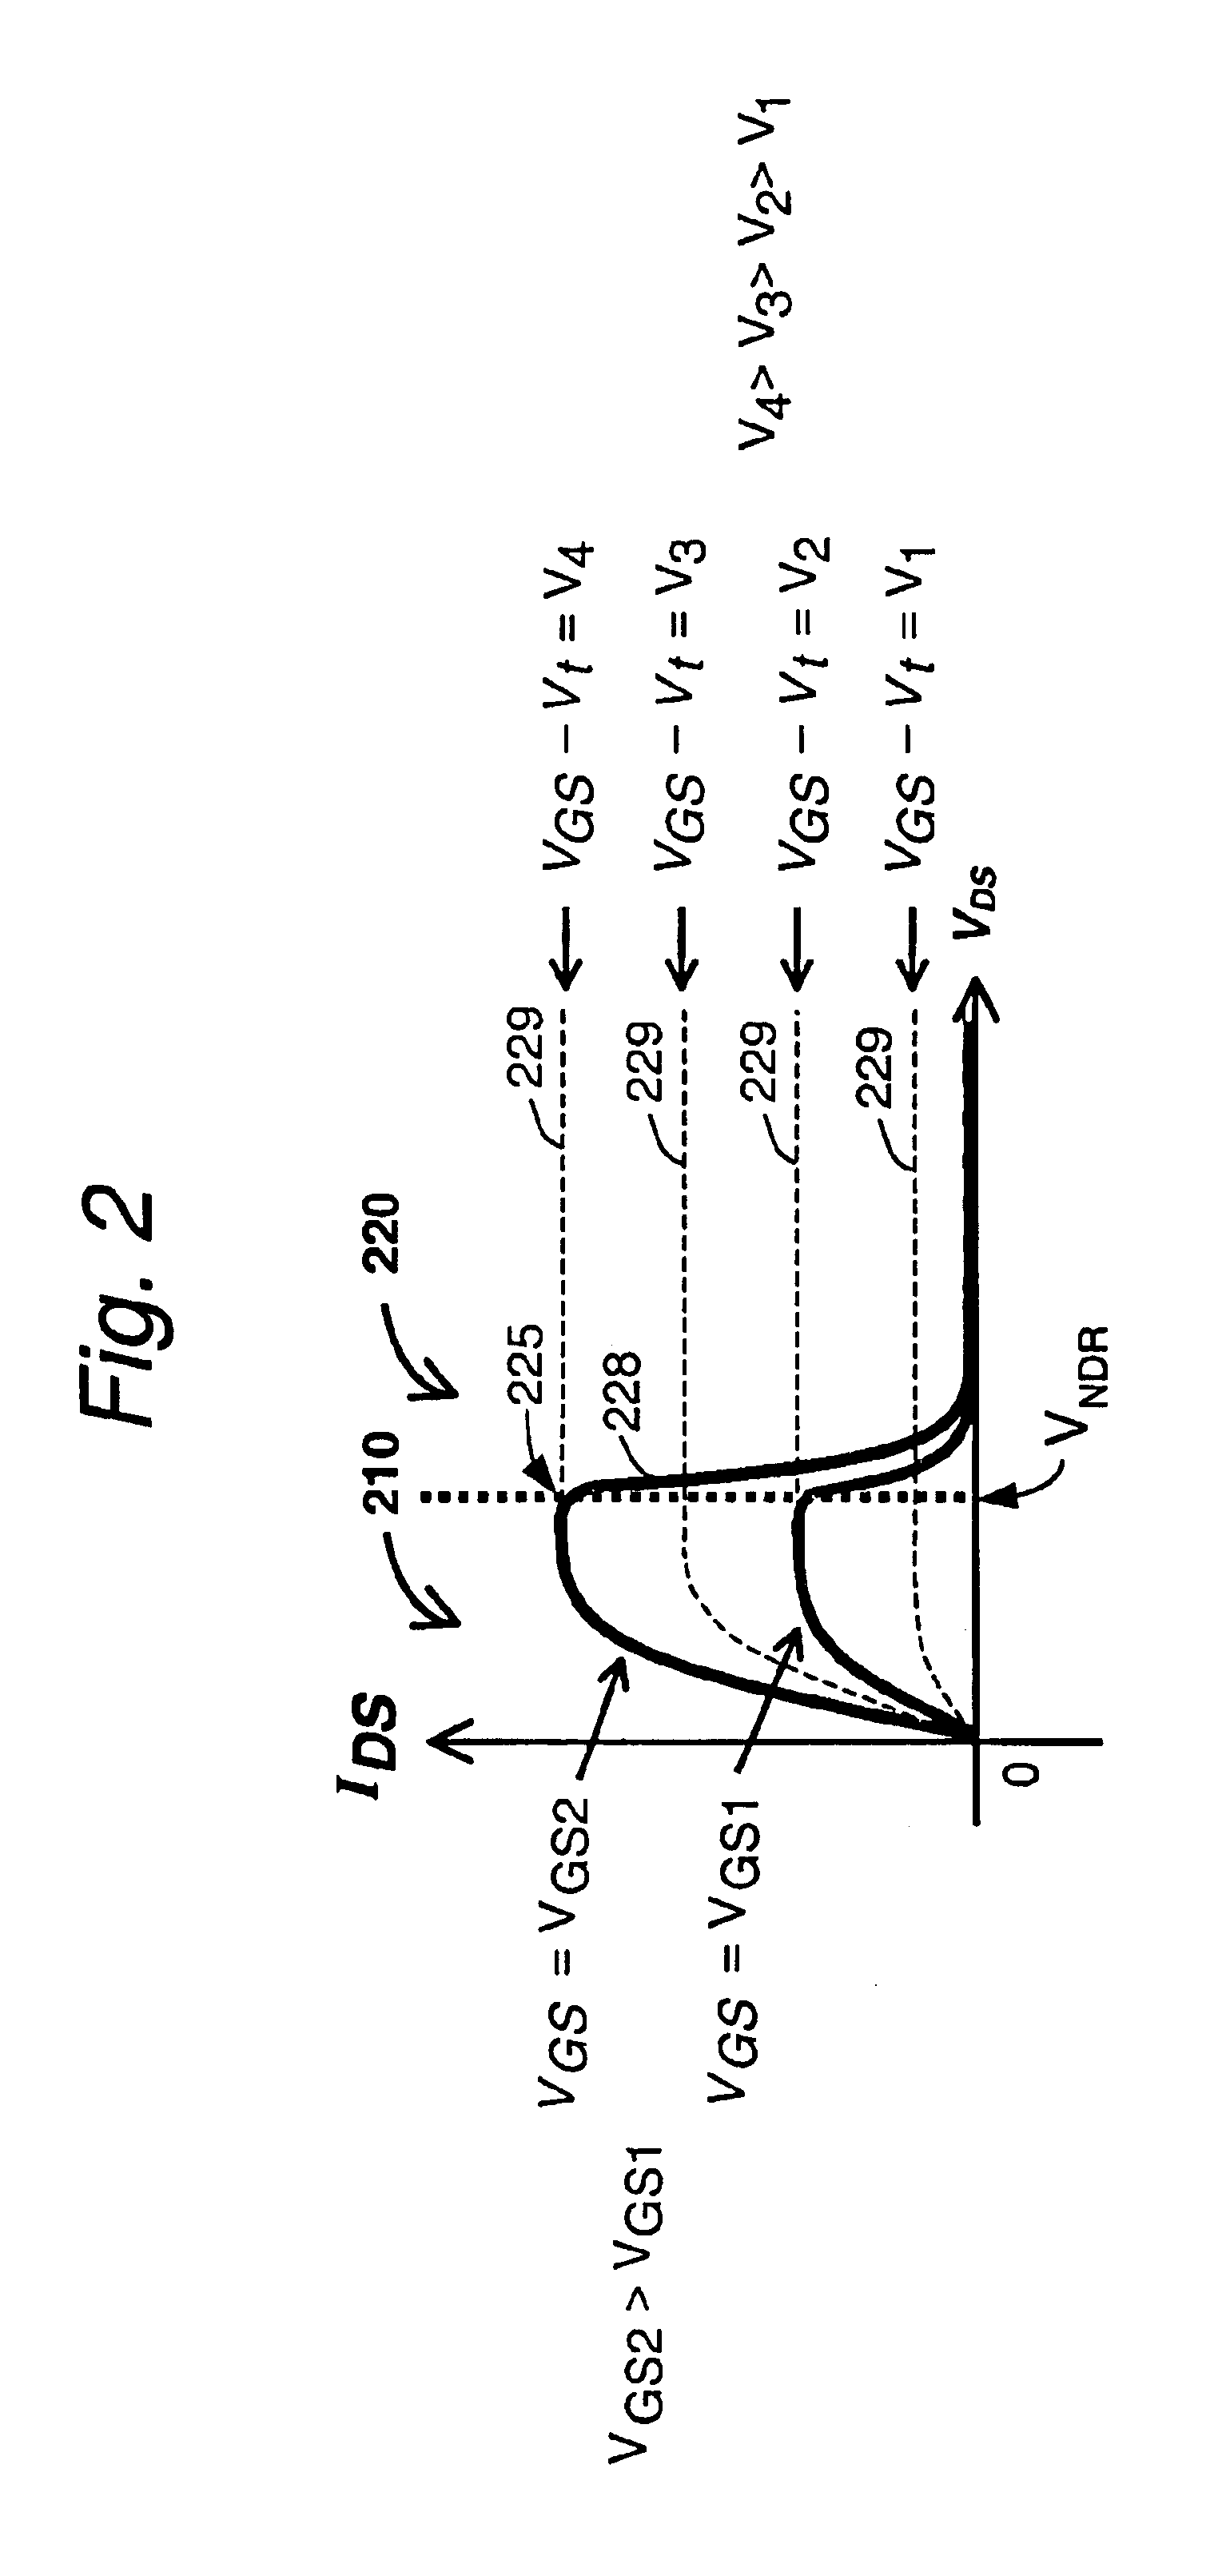 Variable threshold semiconductor device and method of operating same